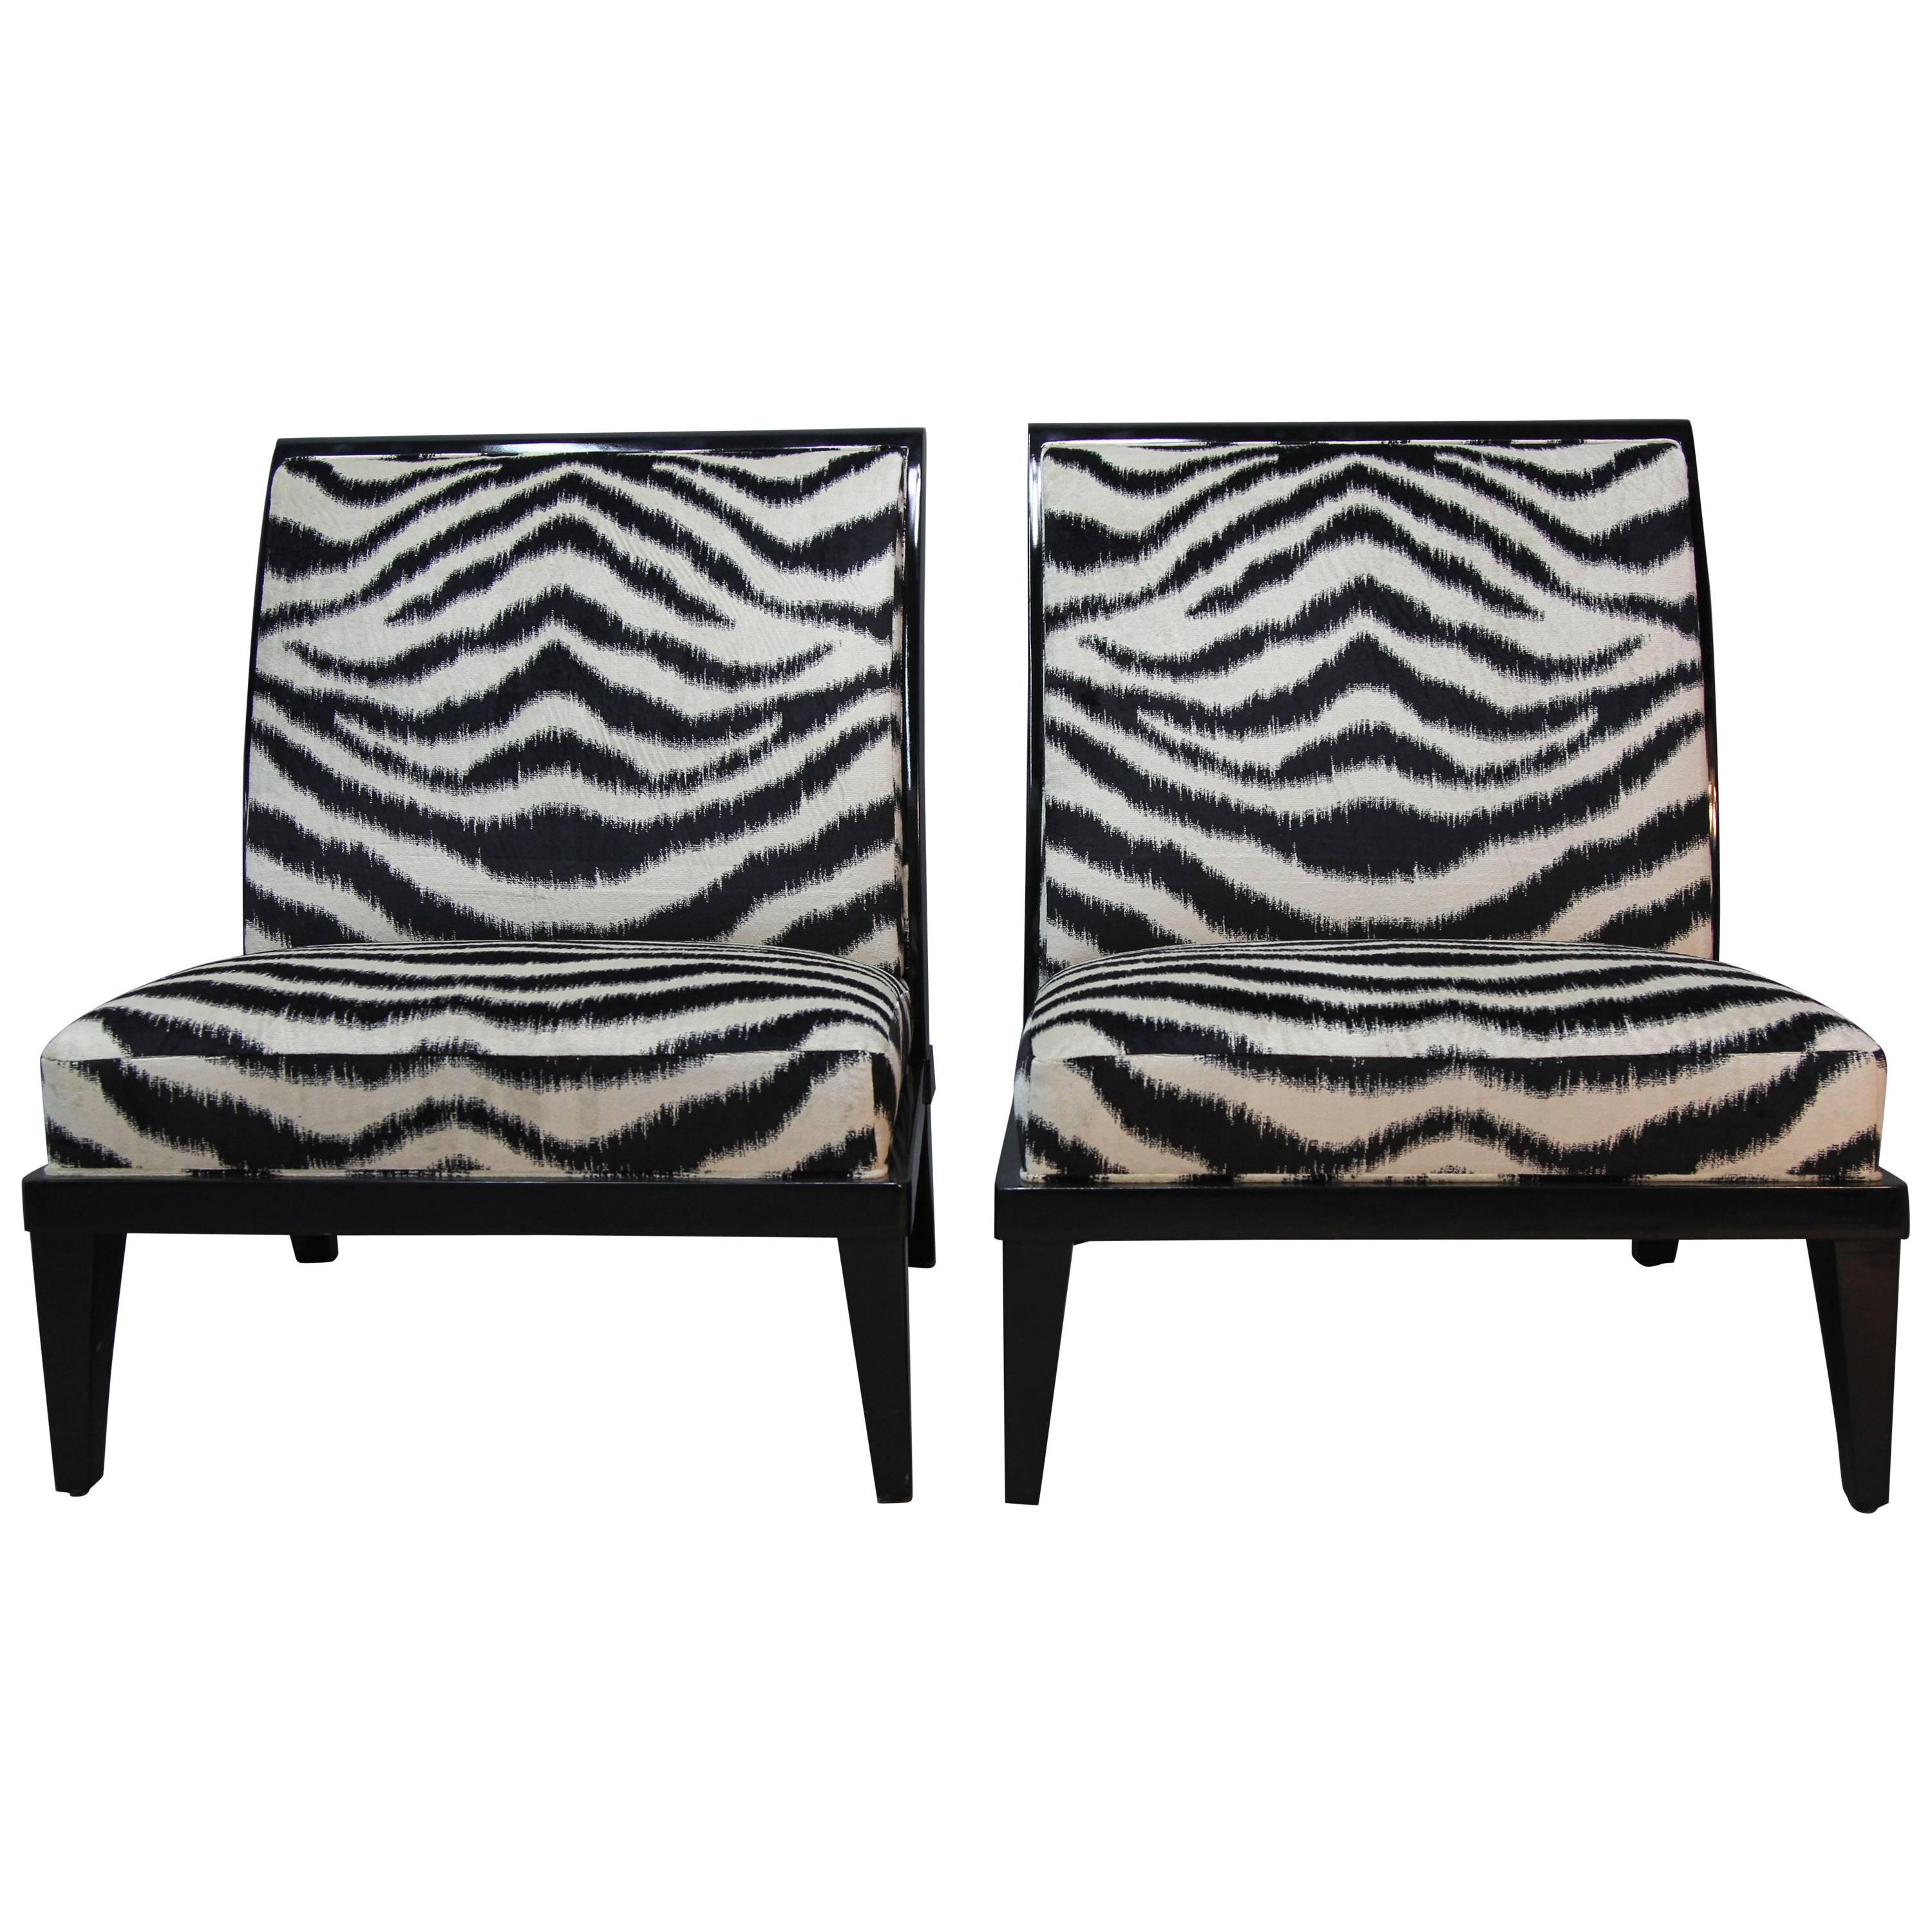 Pair of Holly Hunt Slipper Chairs in Amazing New Upholstery For Sale